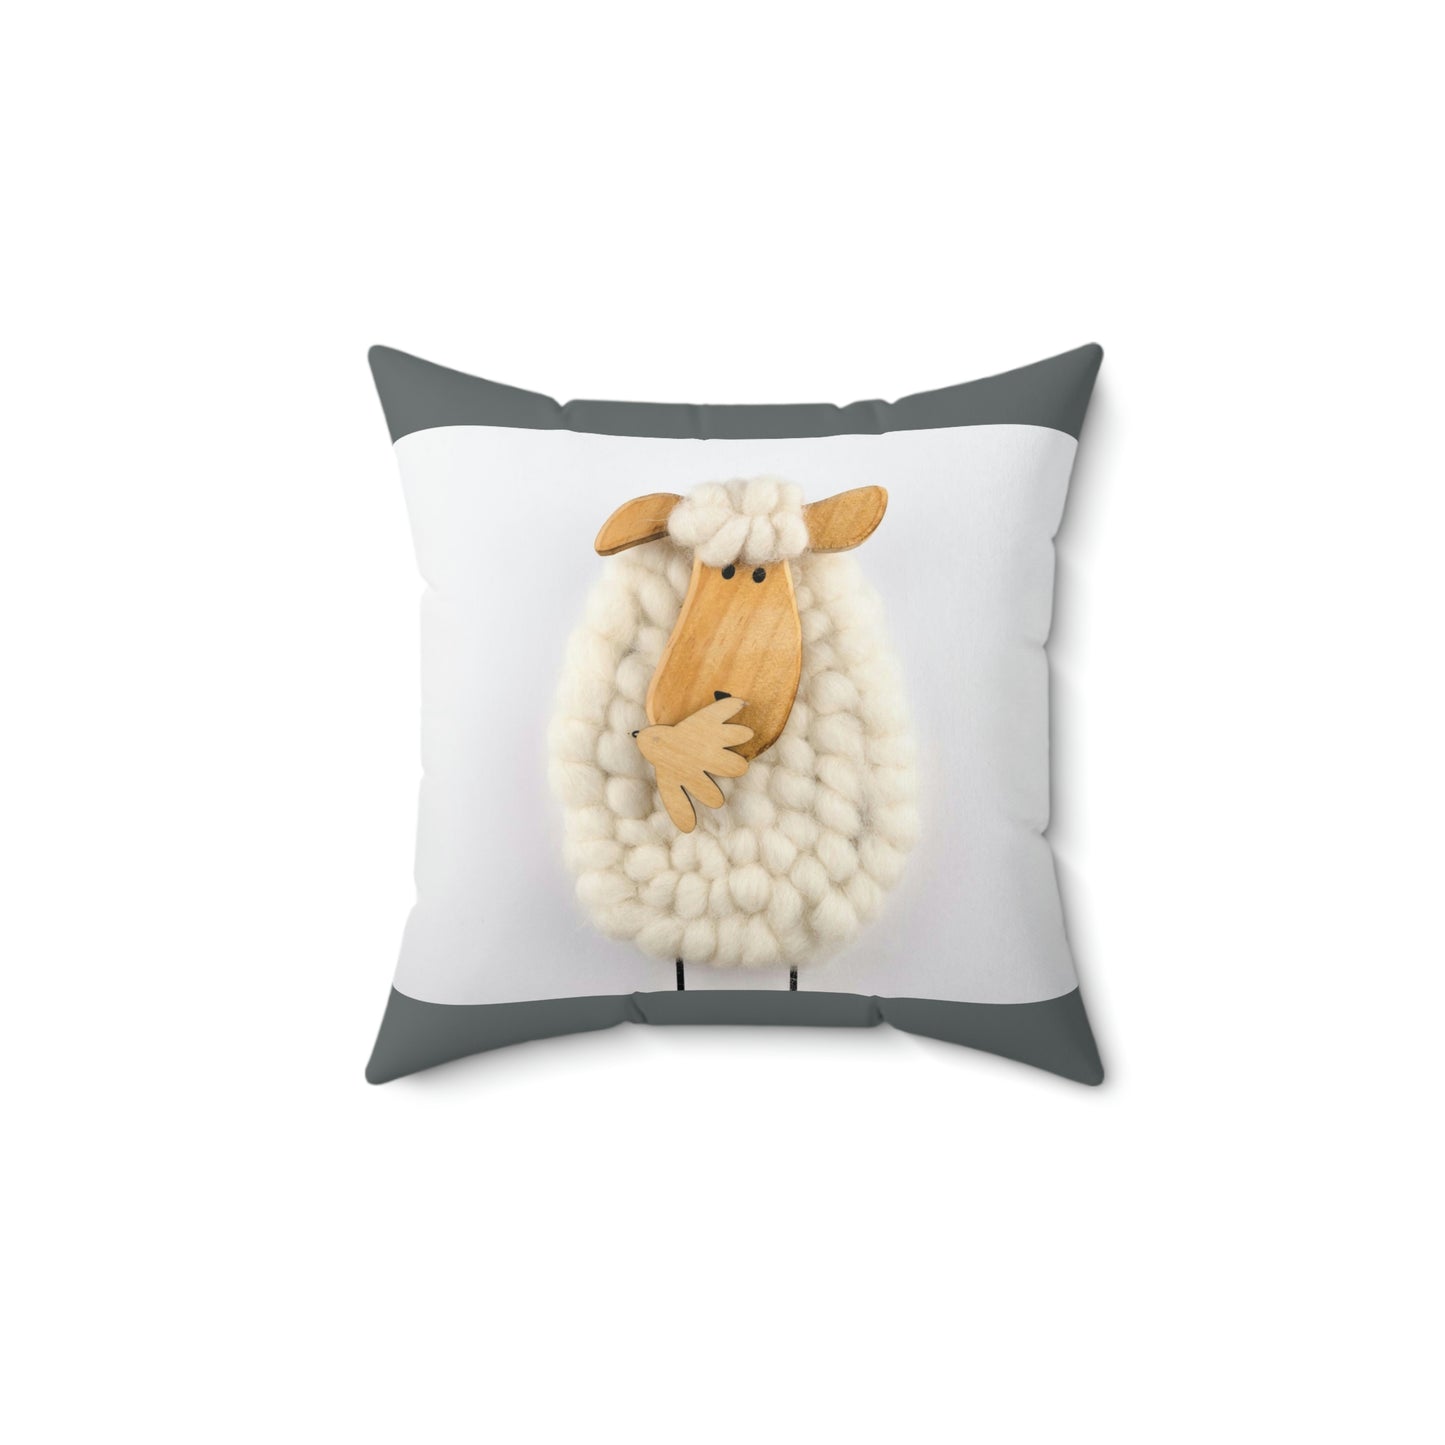 Sheep Pillow Case - Dark Gray and White Colors - Faux Suede Square Pillow Case